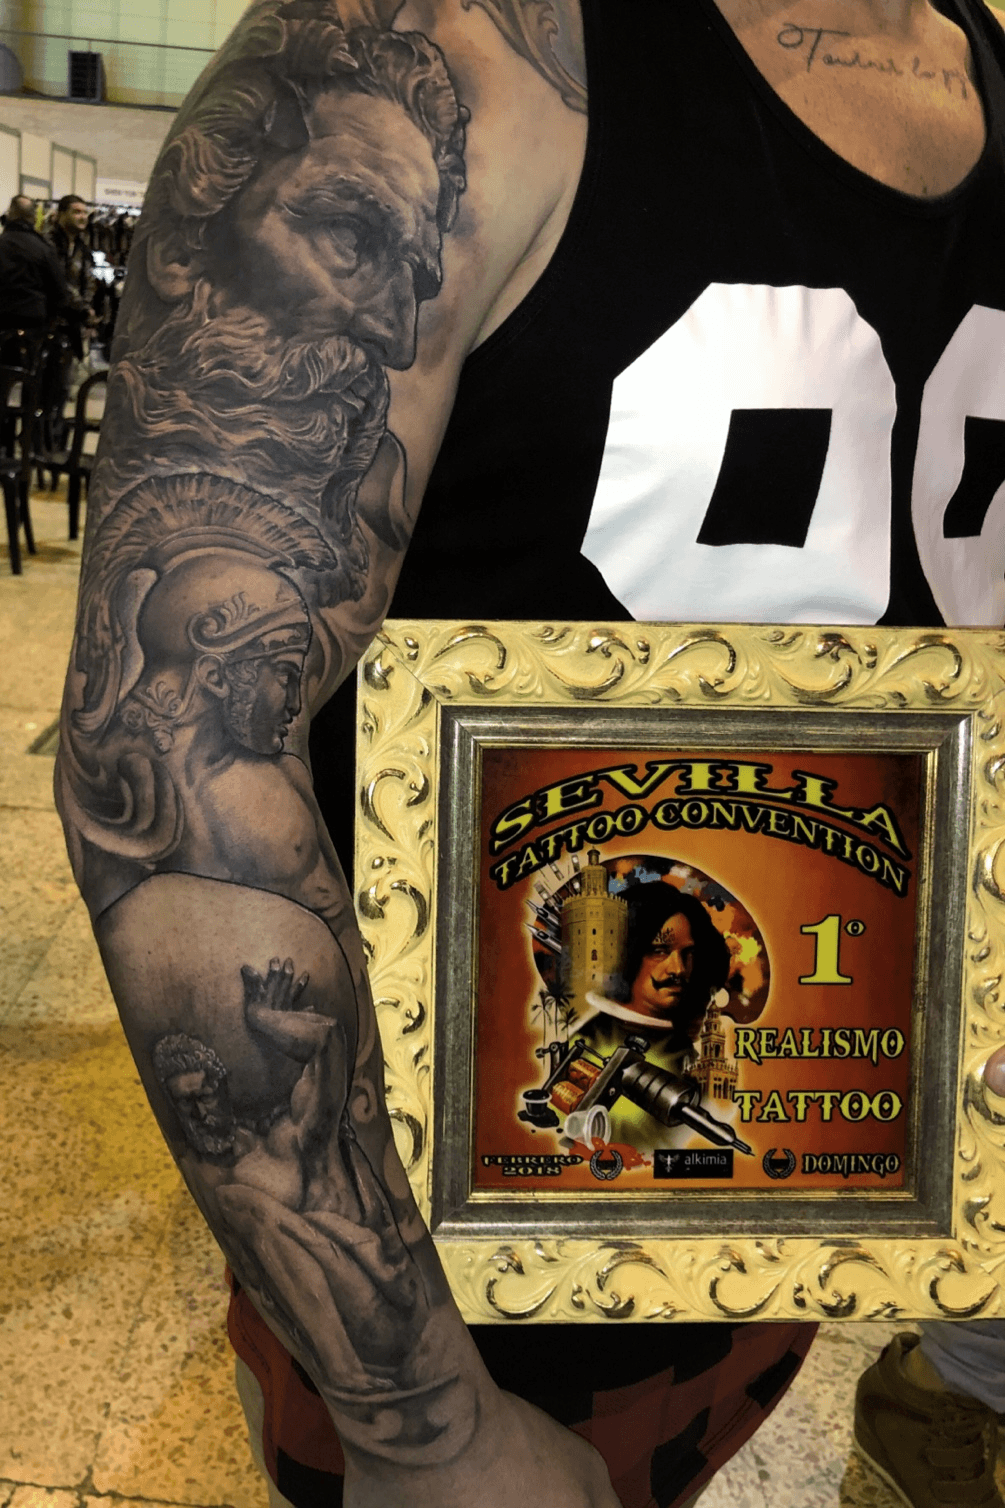 Tattoo uploaded by el_mono_tatuador • First place on Realism Category at Sevilla Tattoo Convention 2018 • Tattoodo